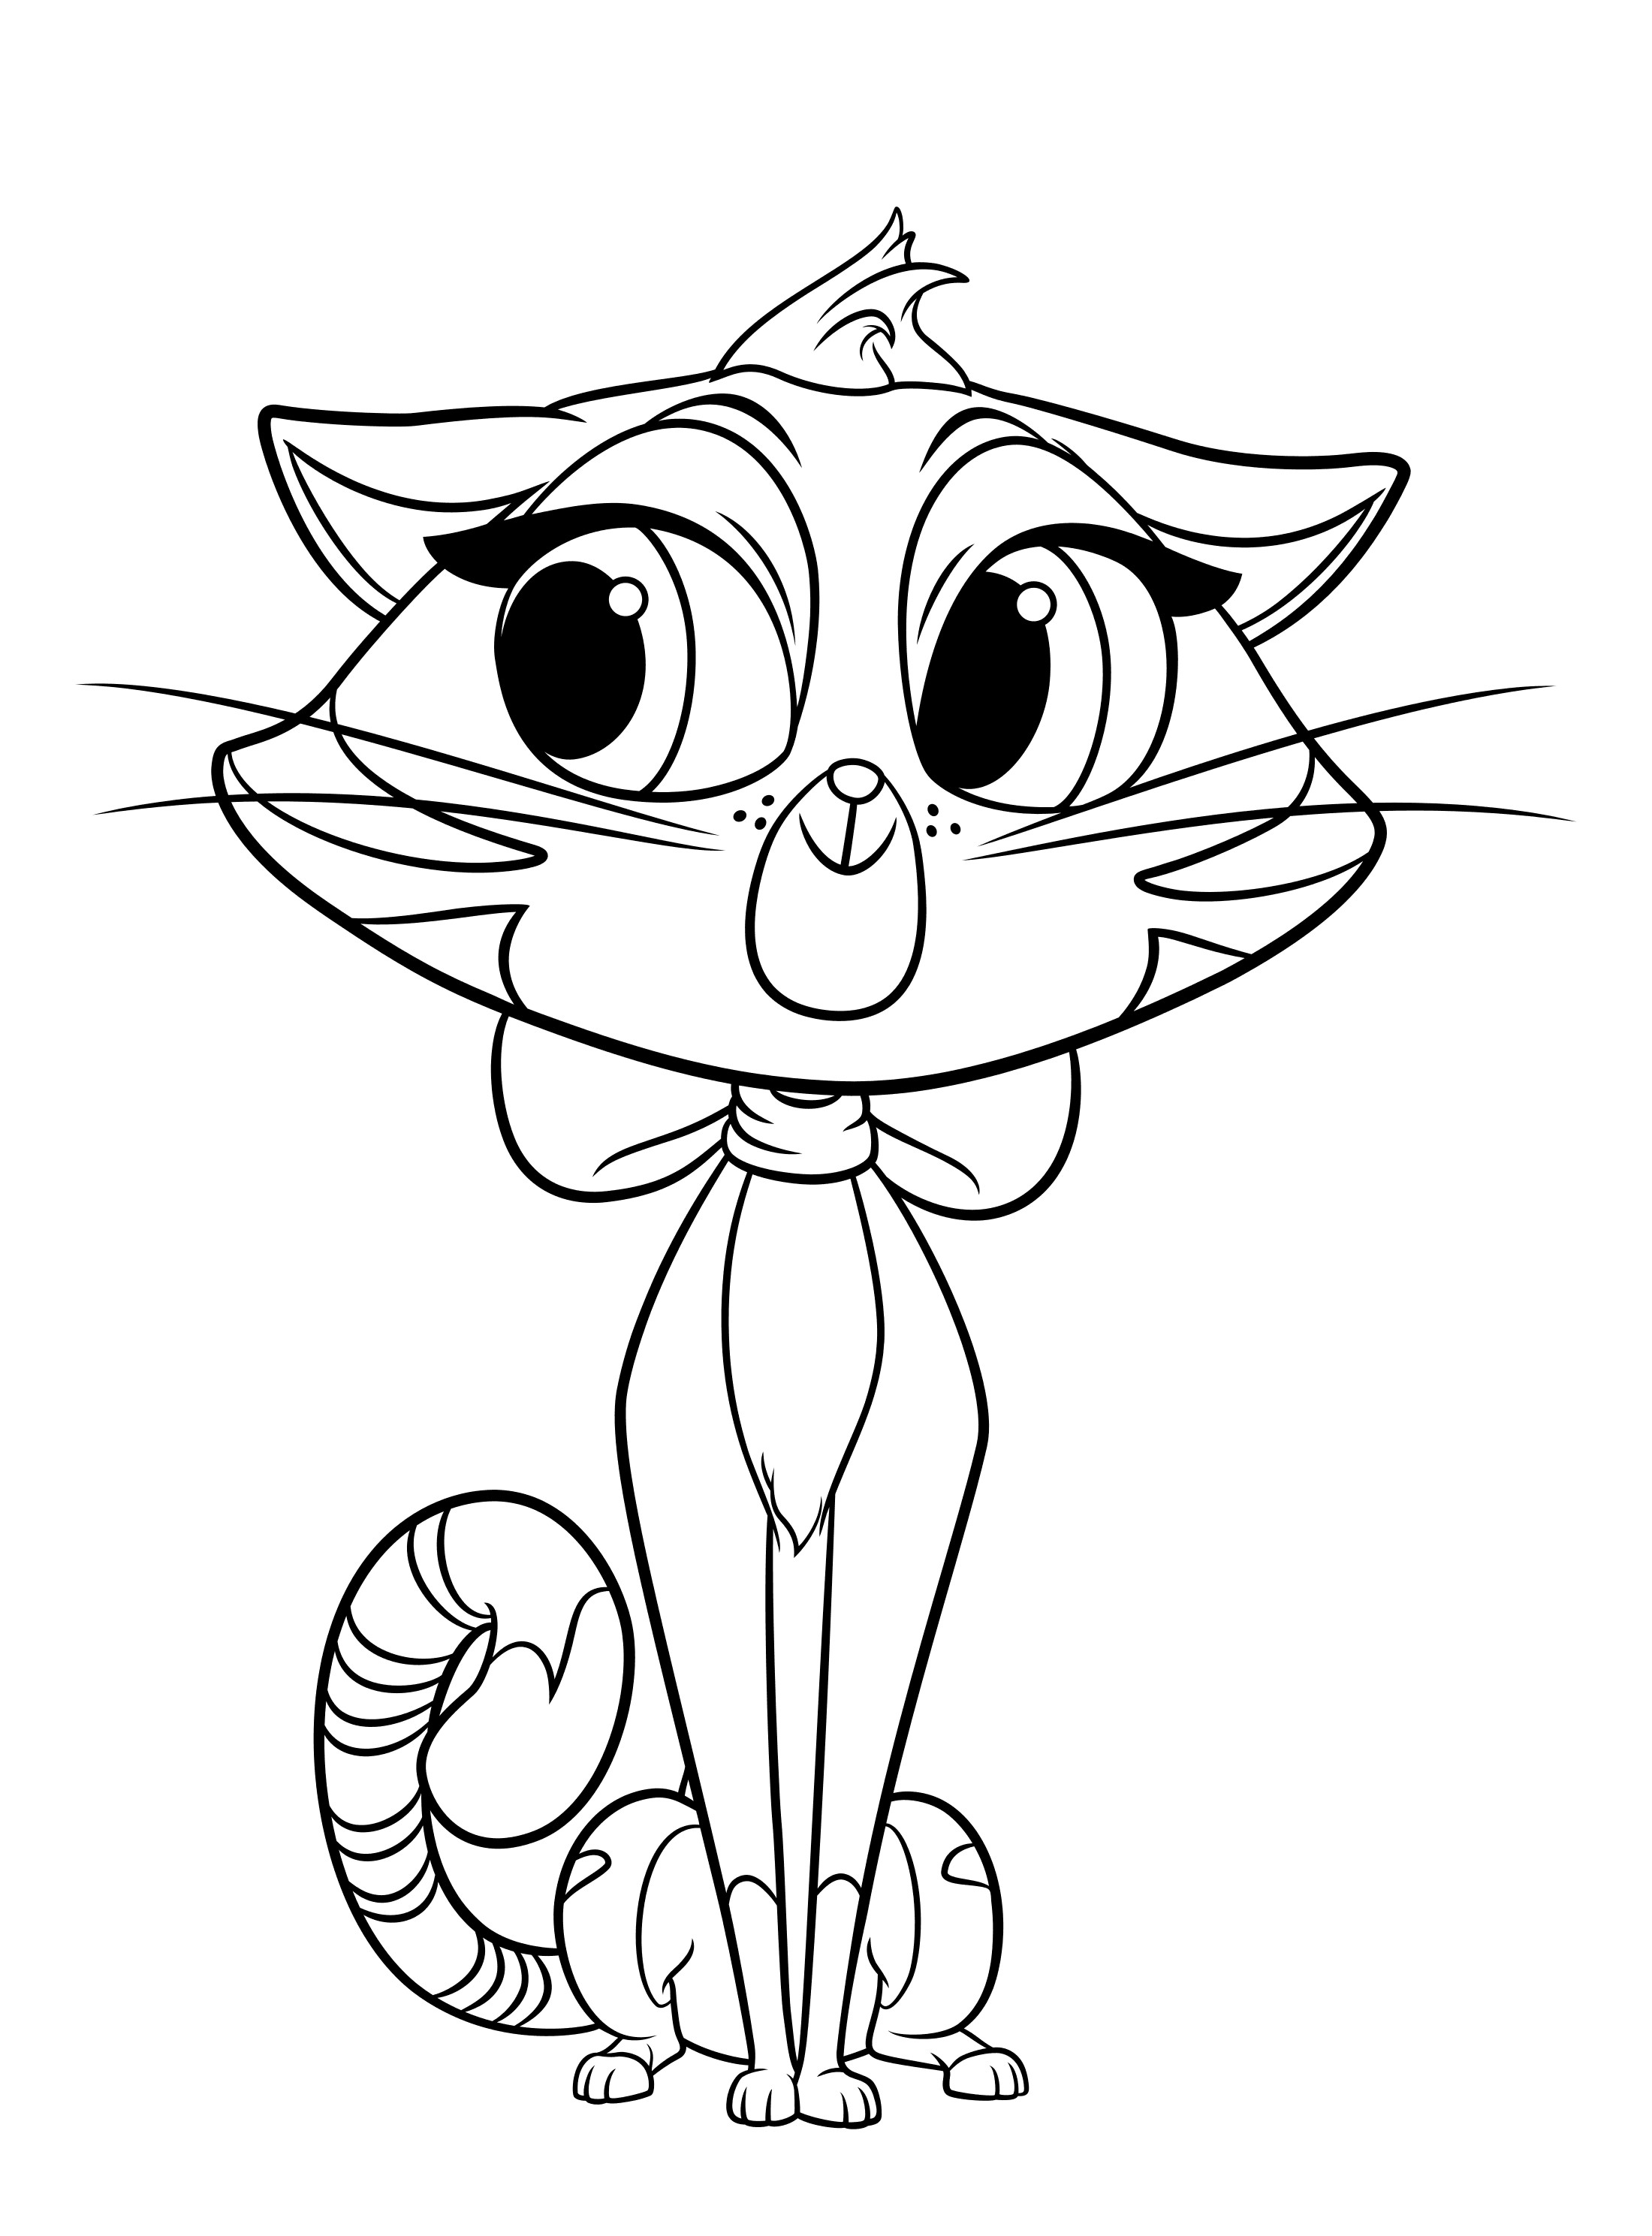 Puppy Dog Pals Printable Coloring Pages - Printable Word Searches